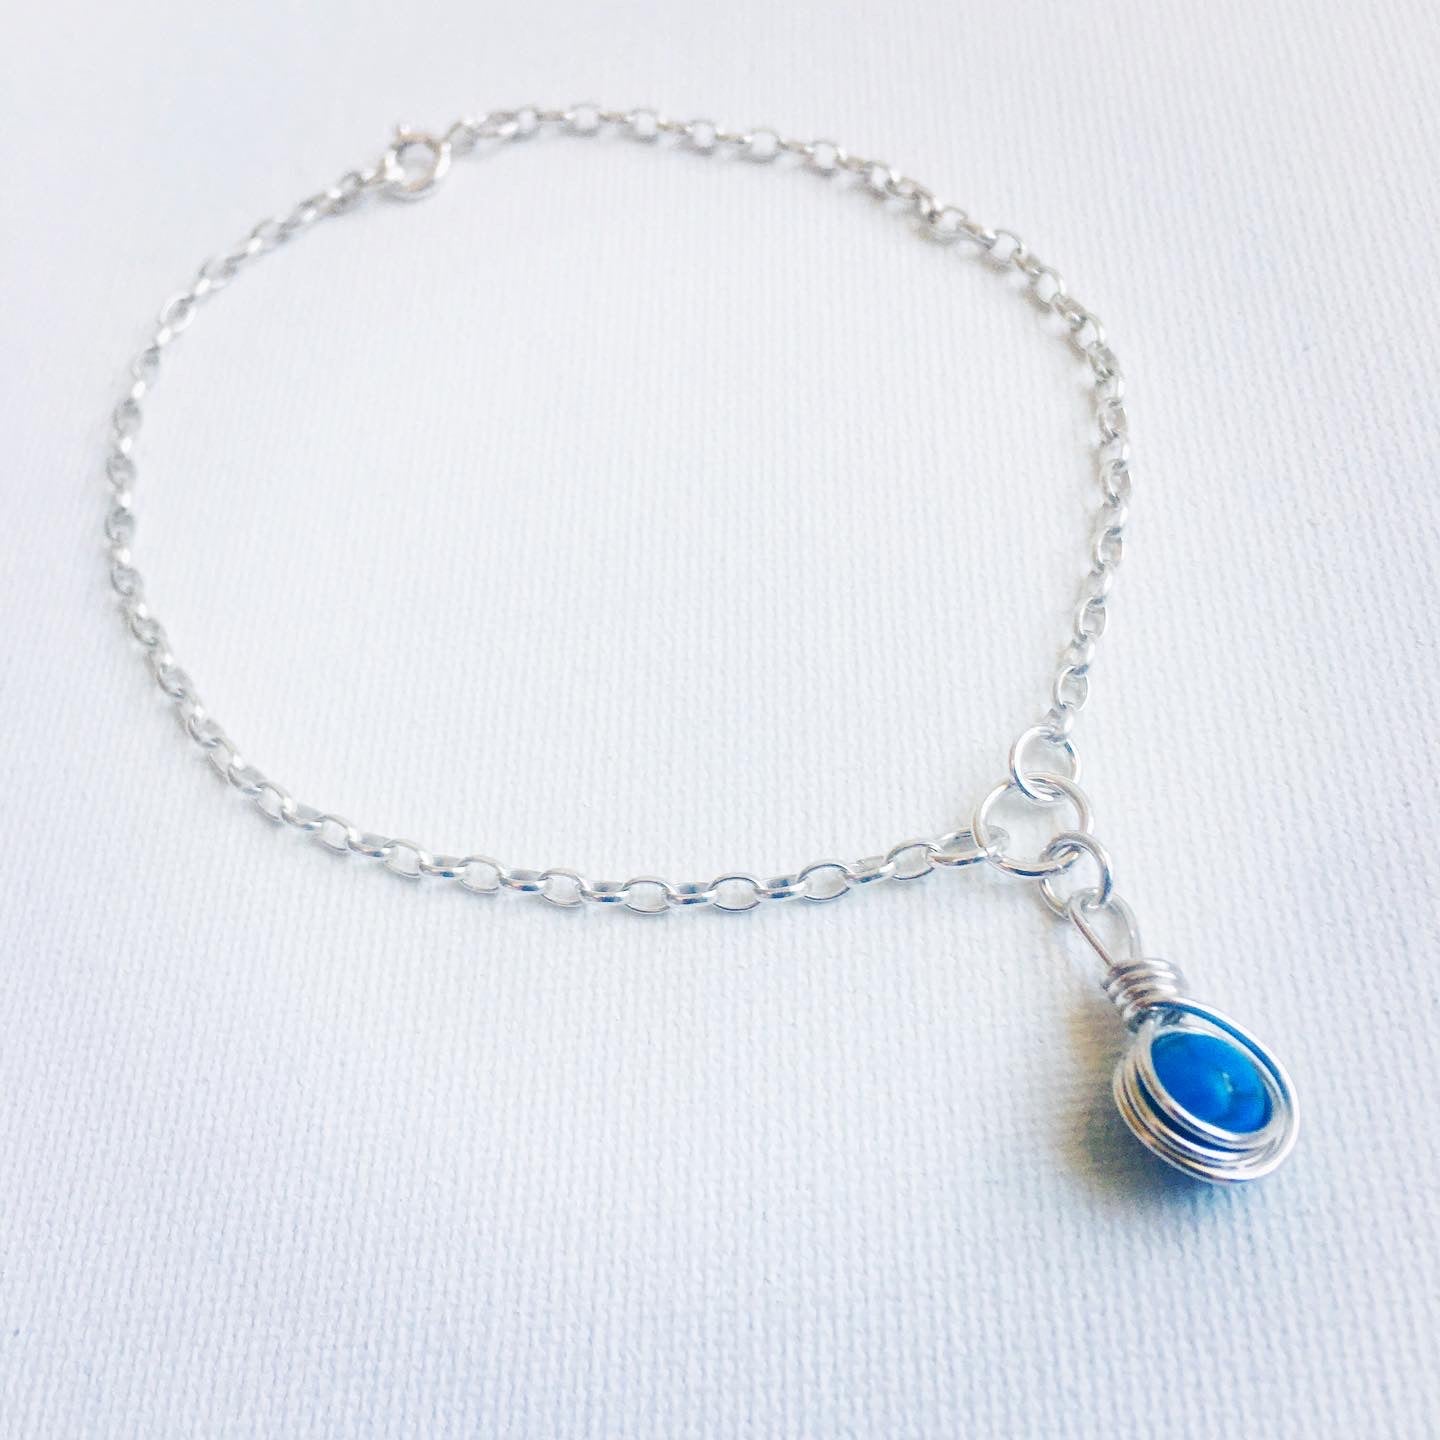 Silver anklet chain with dyed sodalite natural semi-precious stone